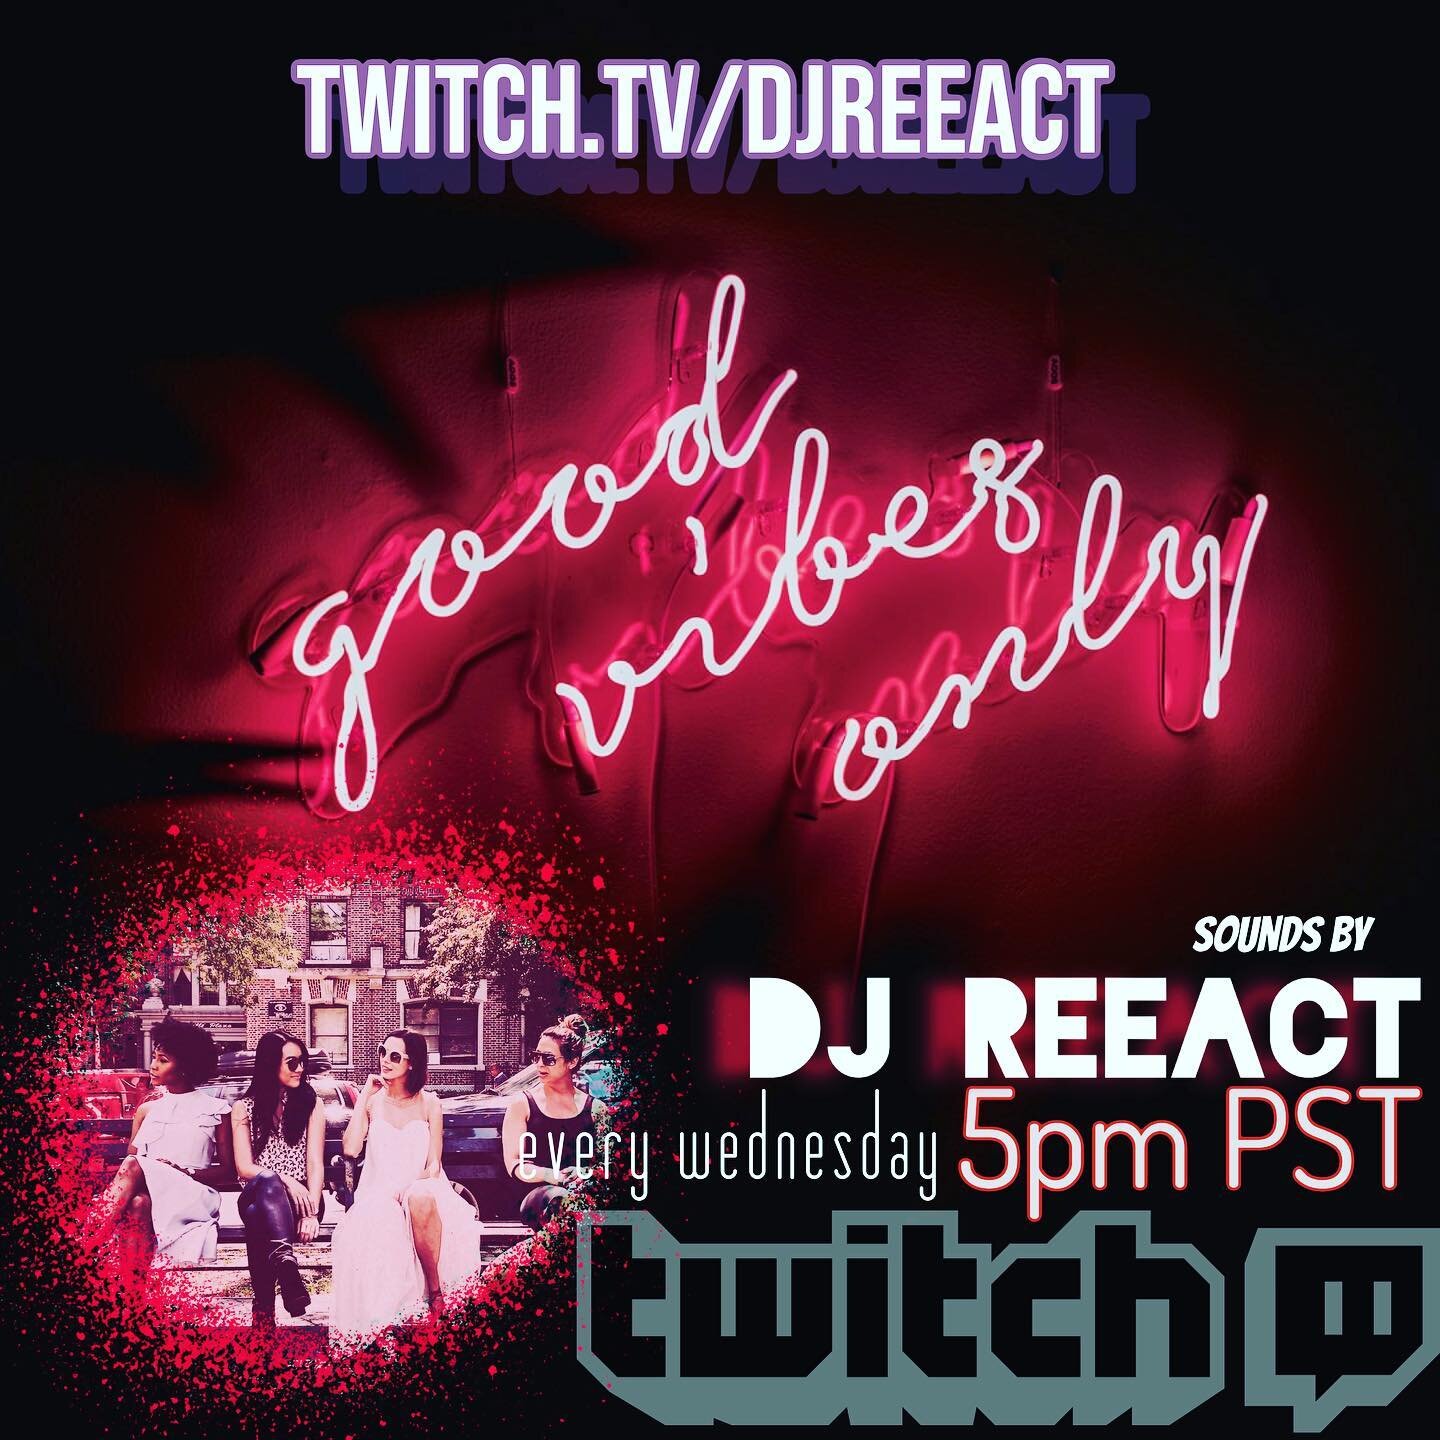 My Twitch schedule is growing, Wednesdays at 5pm PST is now in the line up. Make the switch to Twitch. I&rsquo;m playing your favorite tunes to help get you through the week. Join at Twitch.tv/djreeact and have fun!
-
-
-
-
-
-
-
-
-
-
-
-
-
-
-
-
#d